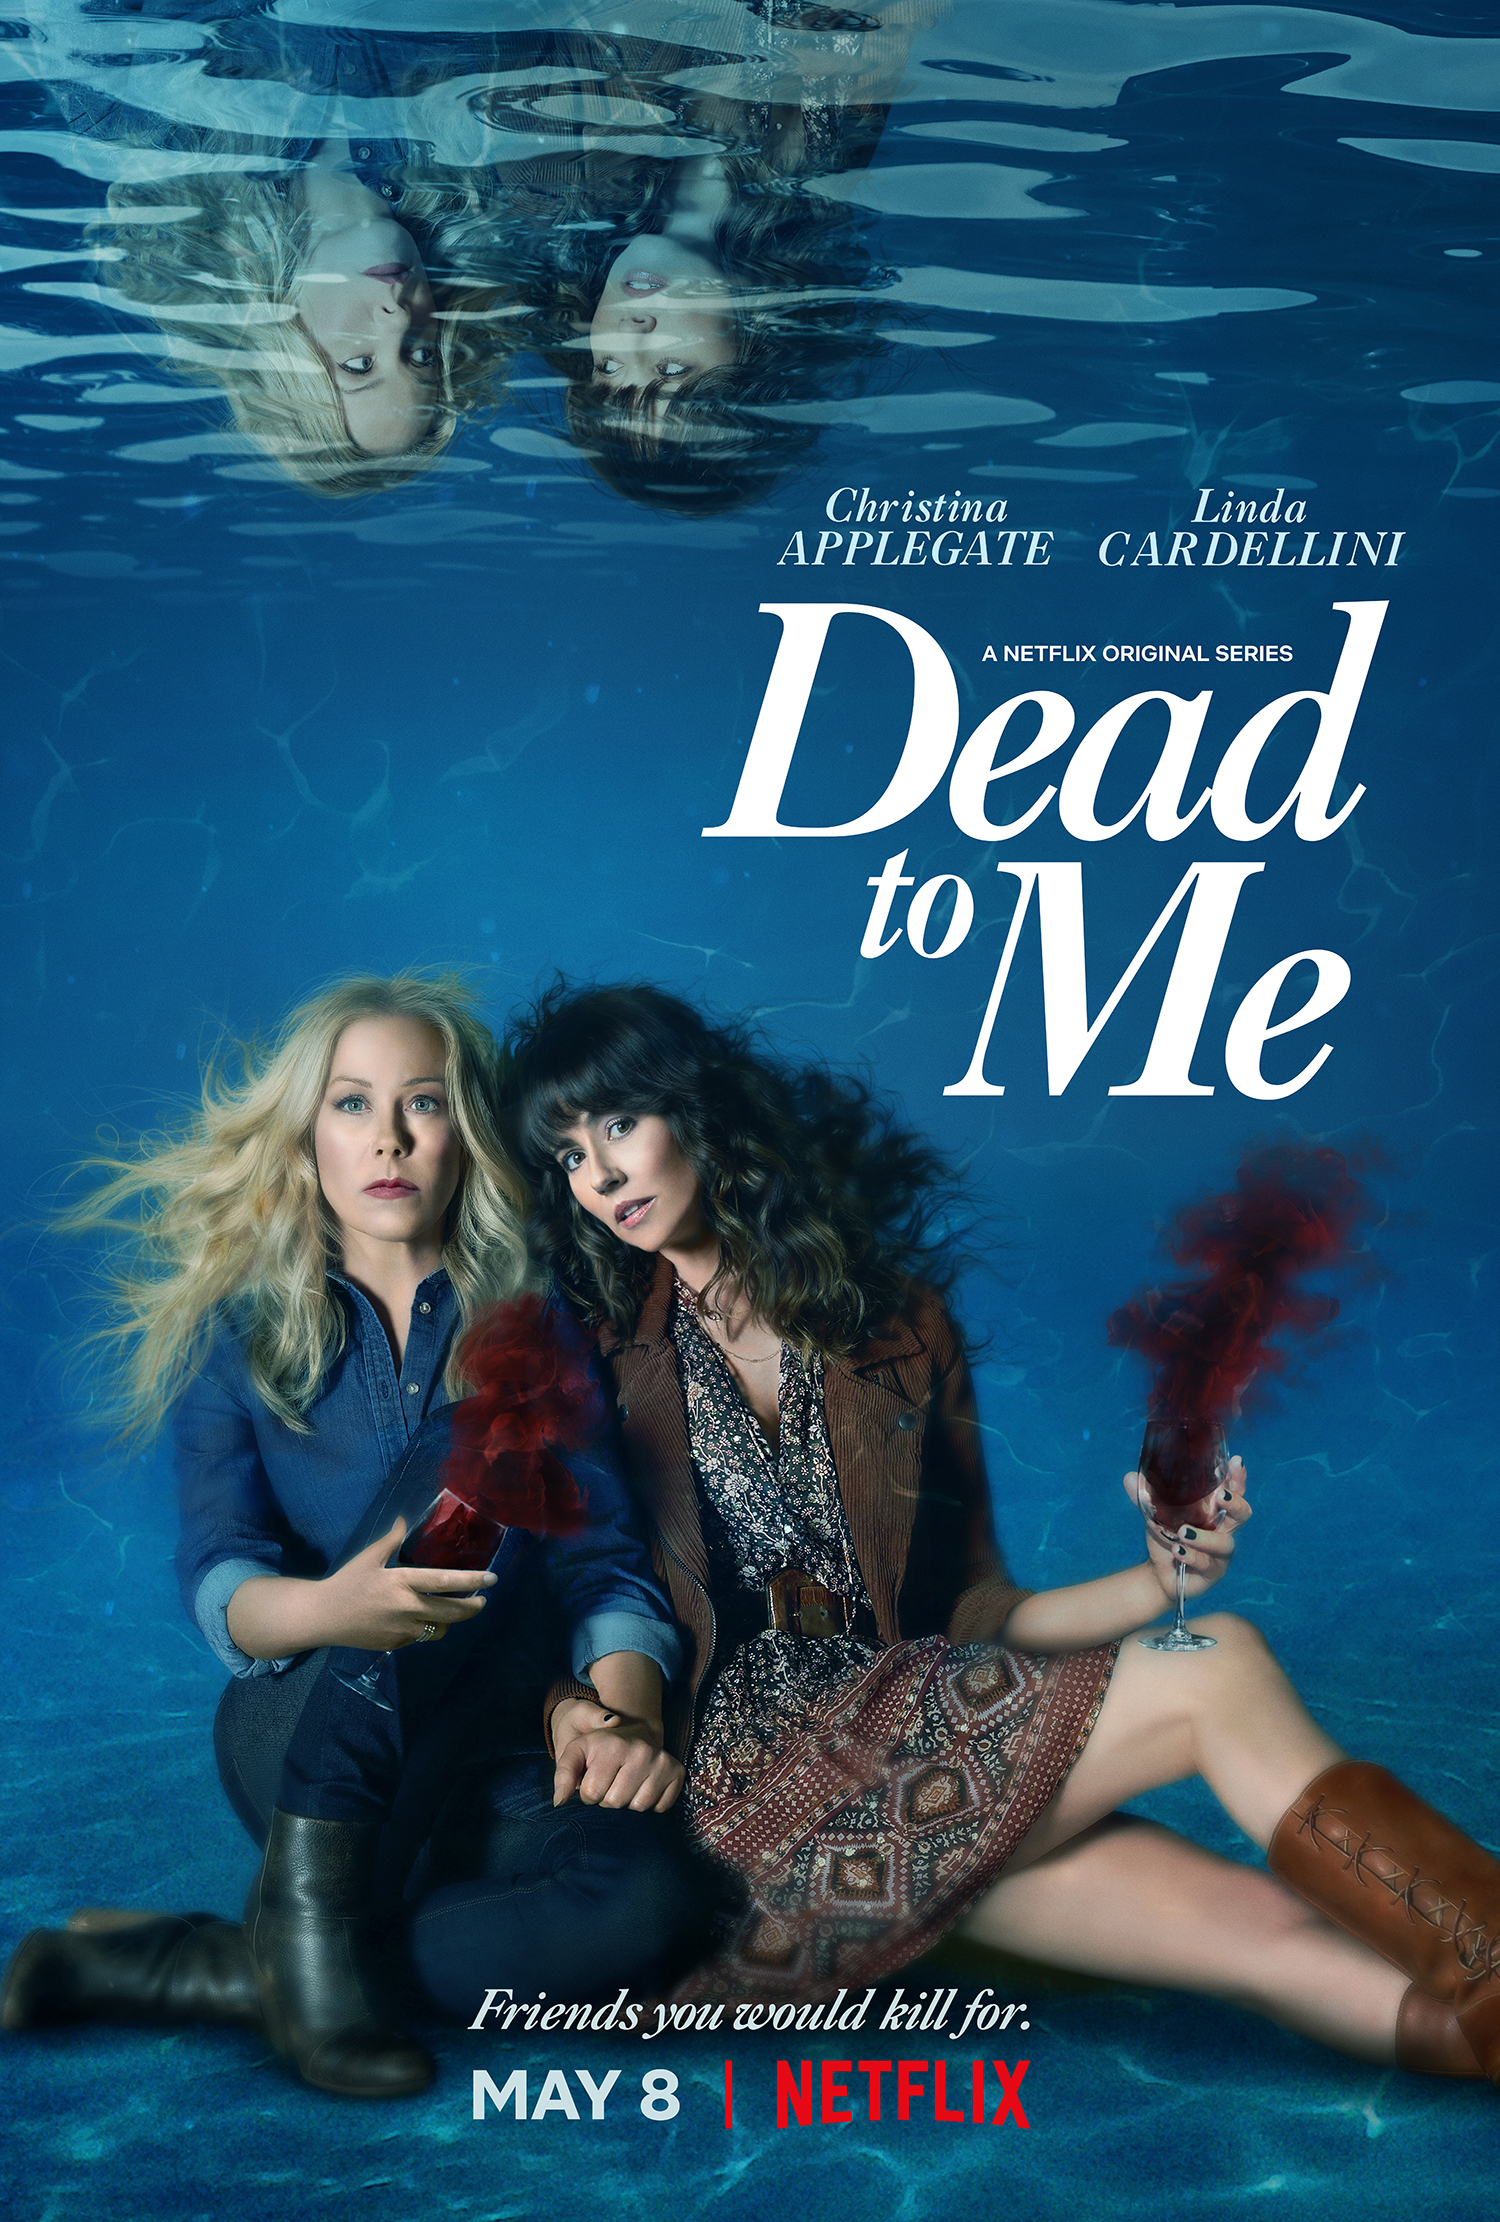 The Full 'Dead to Me' Cast - Who Plays the Characters on Netflix's